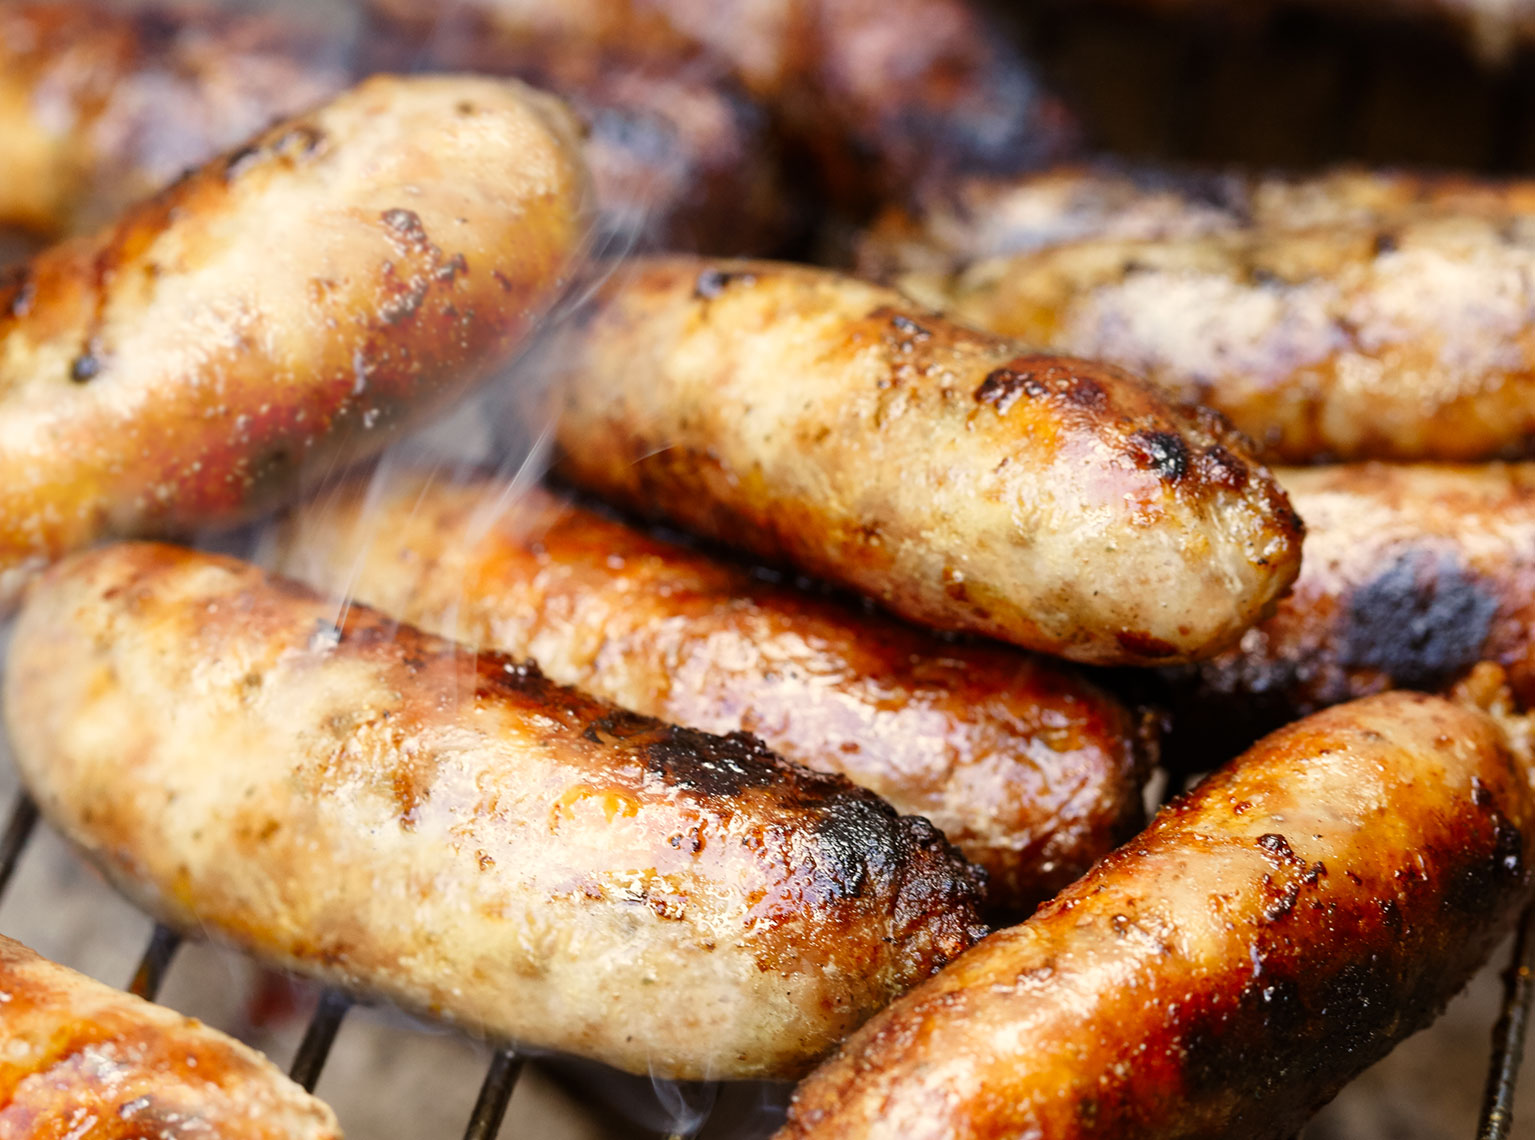 BBQ Sausages | Colin Campbell - Food Photographer